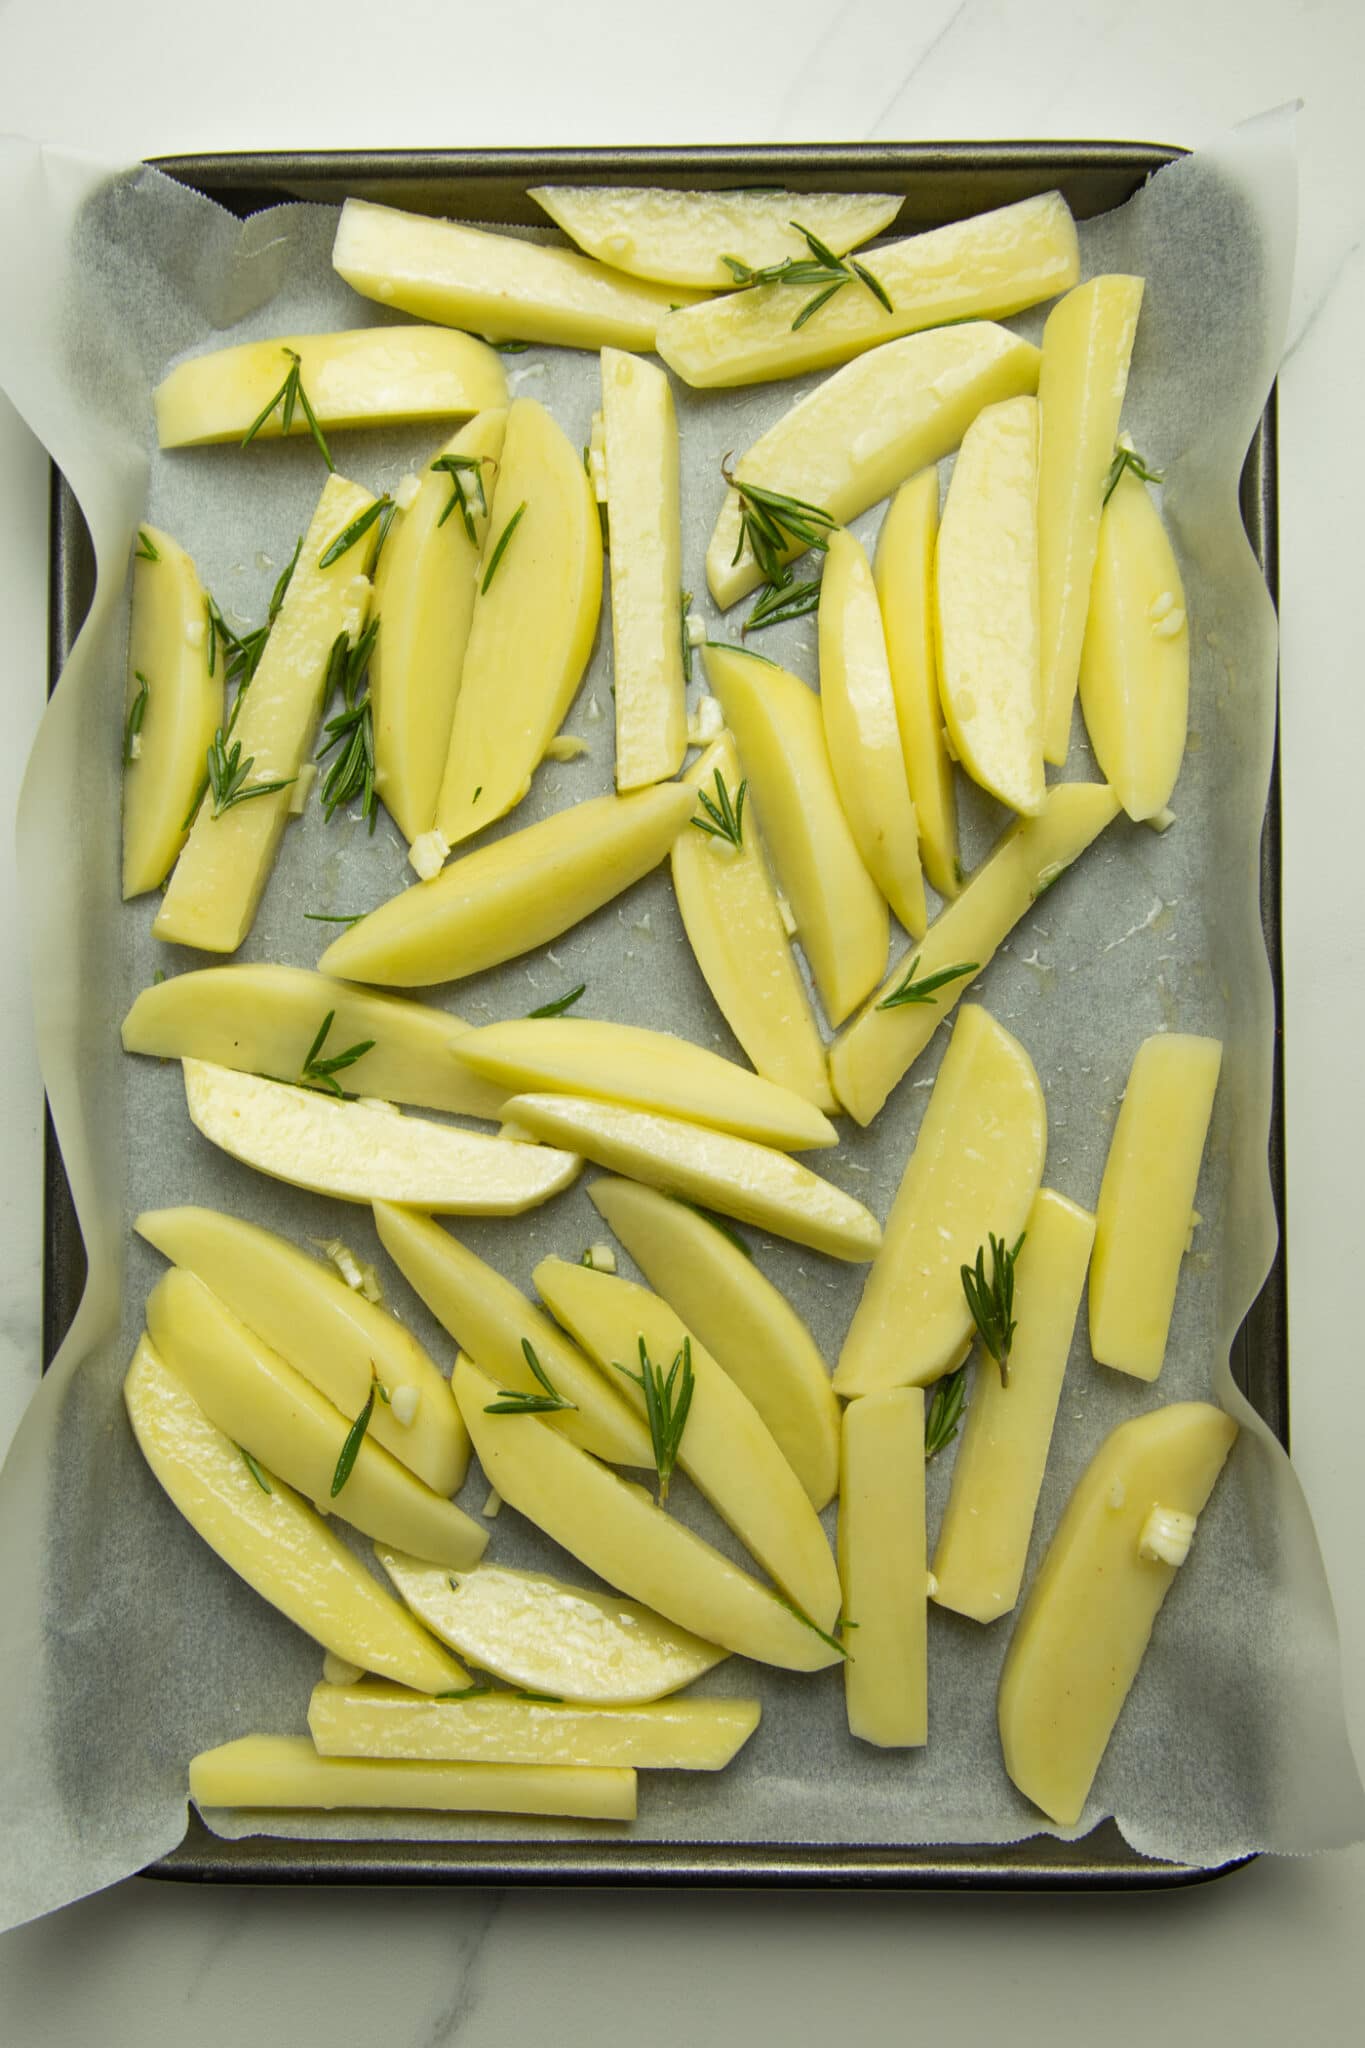 photo of uncooked fries on a baking tray lined with baking paper, topped with fresh garlic, rosemary and sea salt.